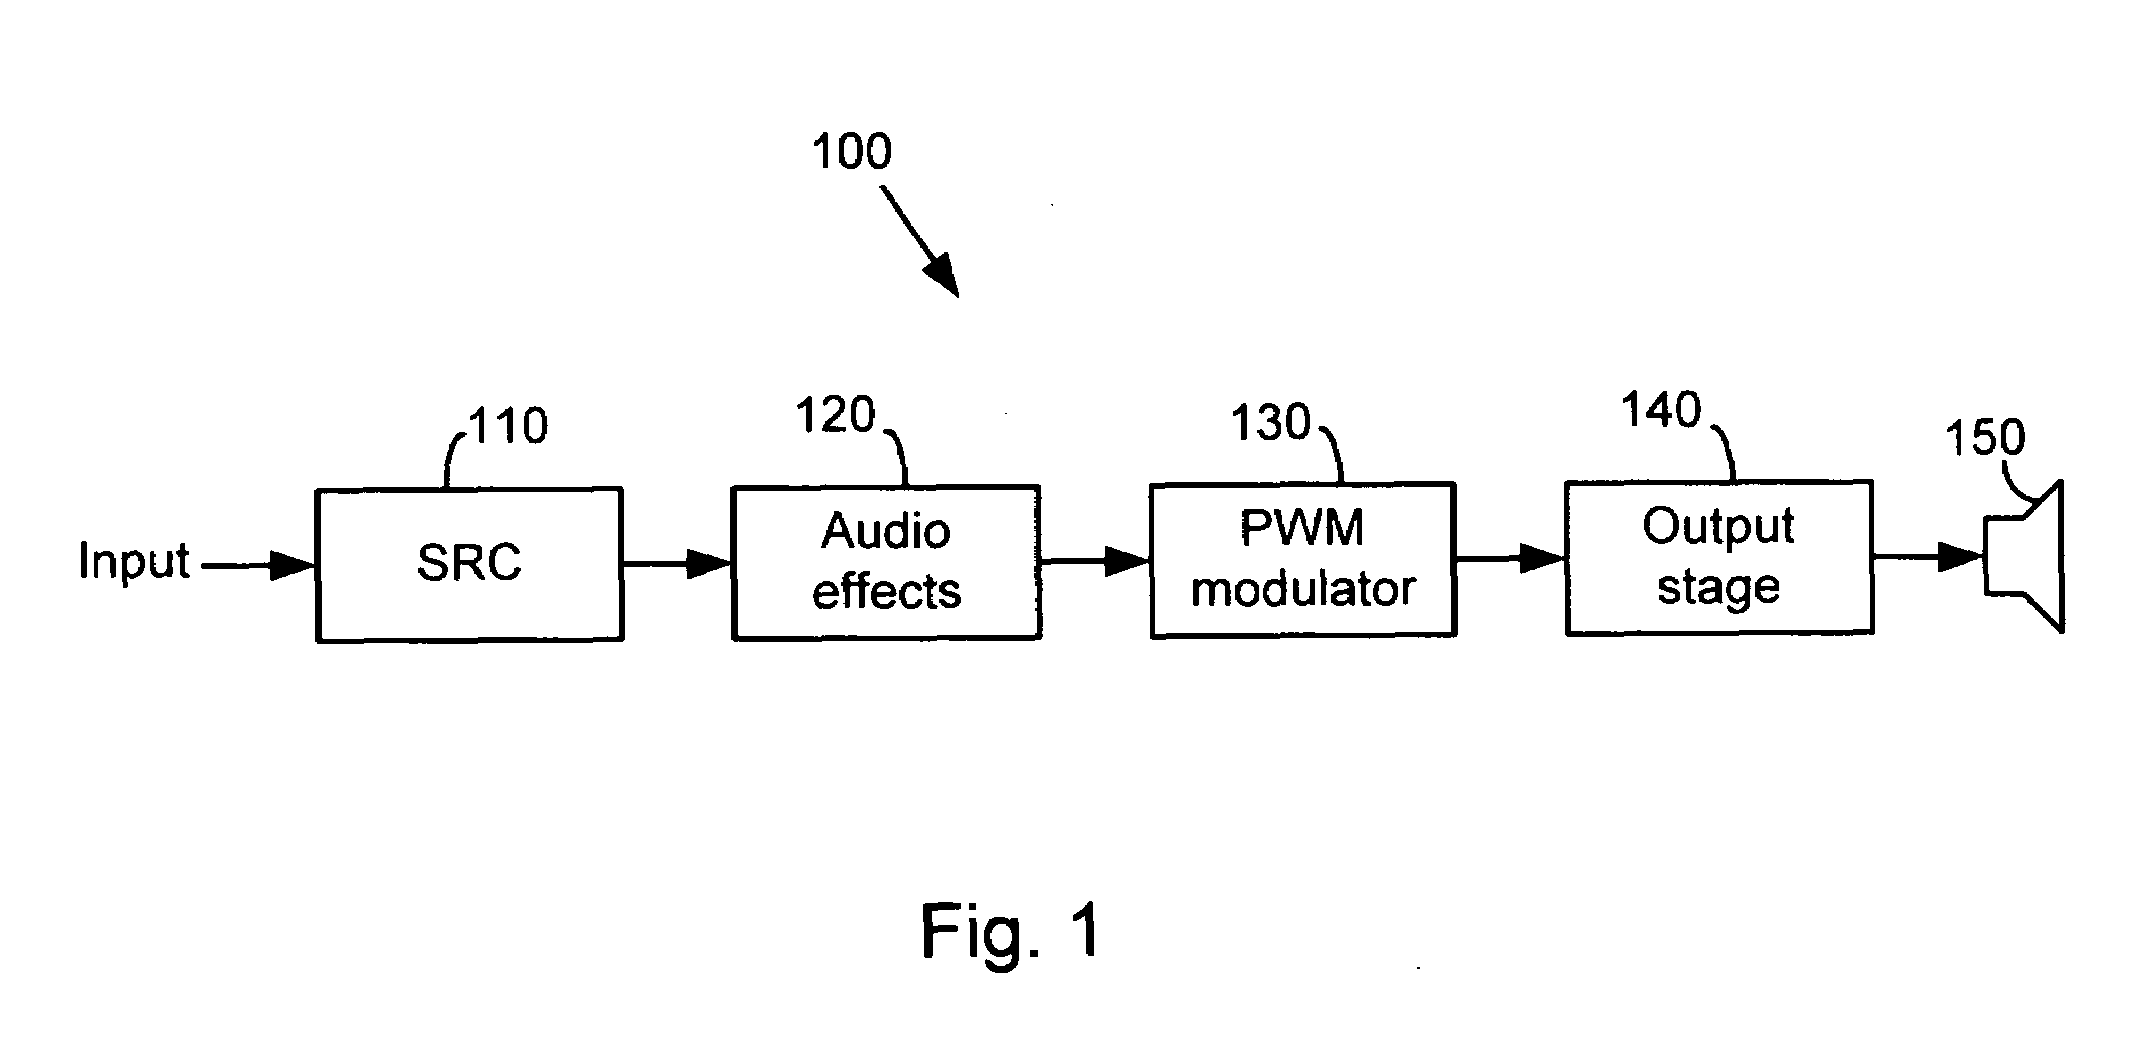 Systems and methods for sample rate conversion using multiple rate estimate counters